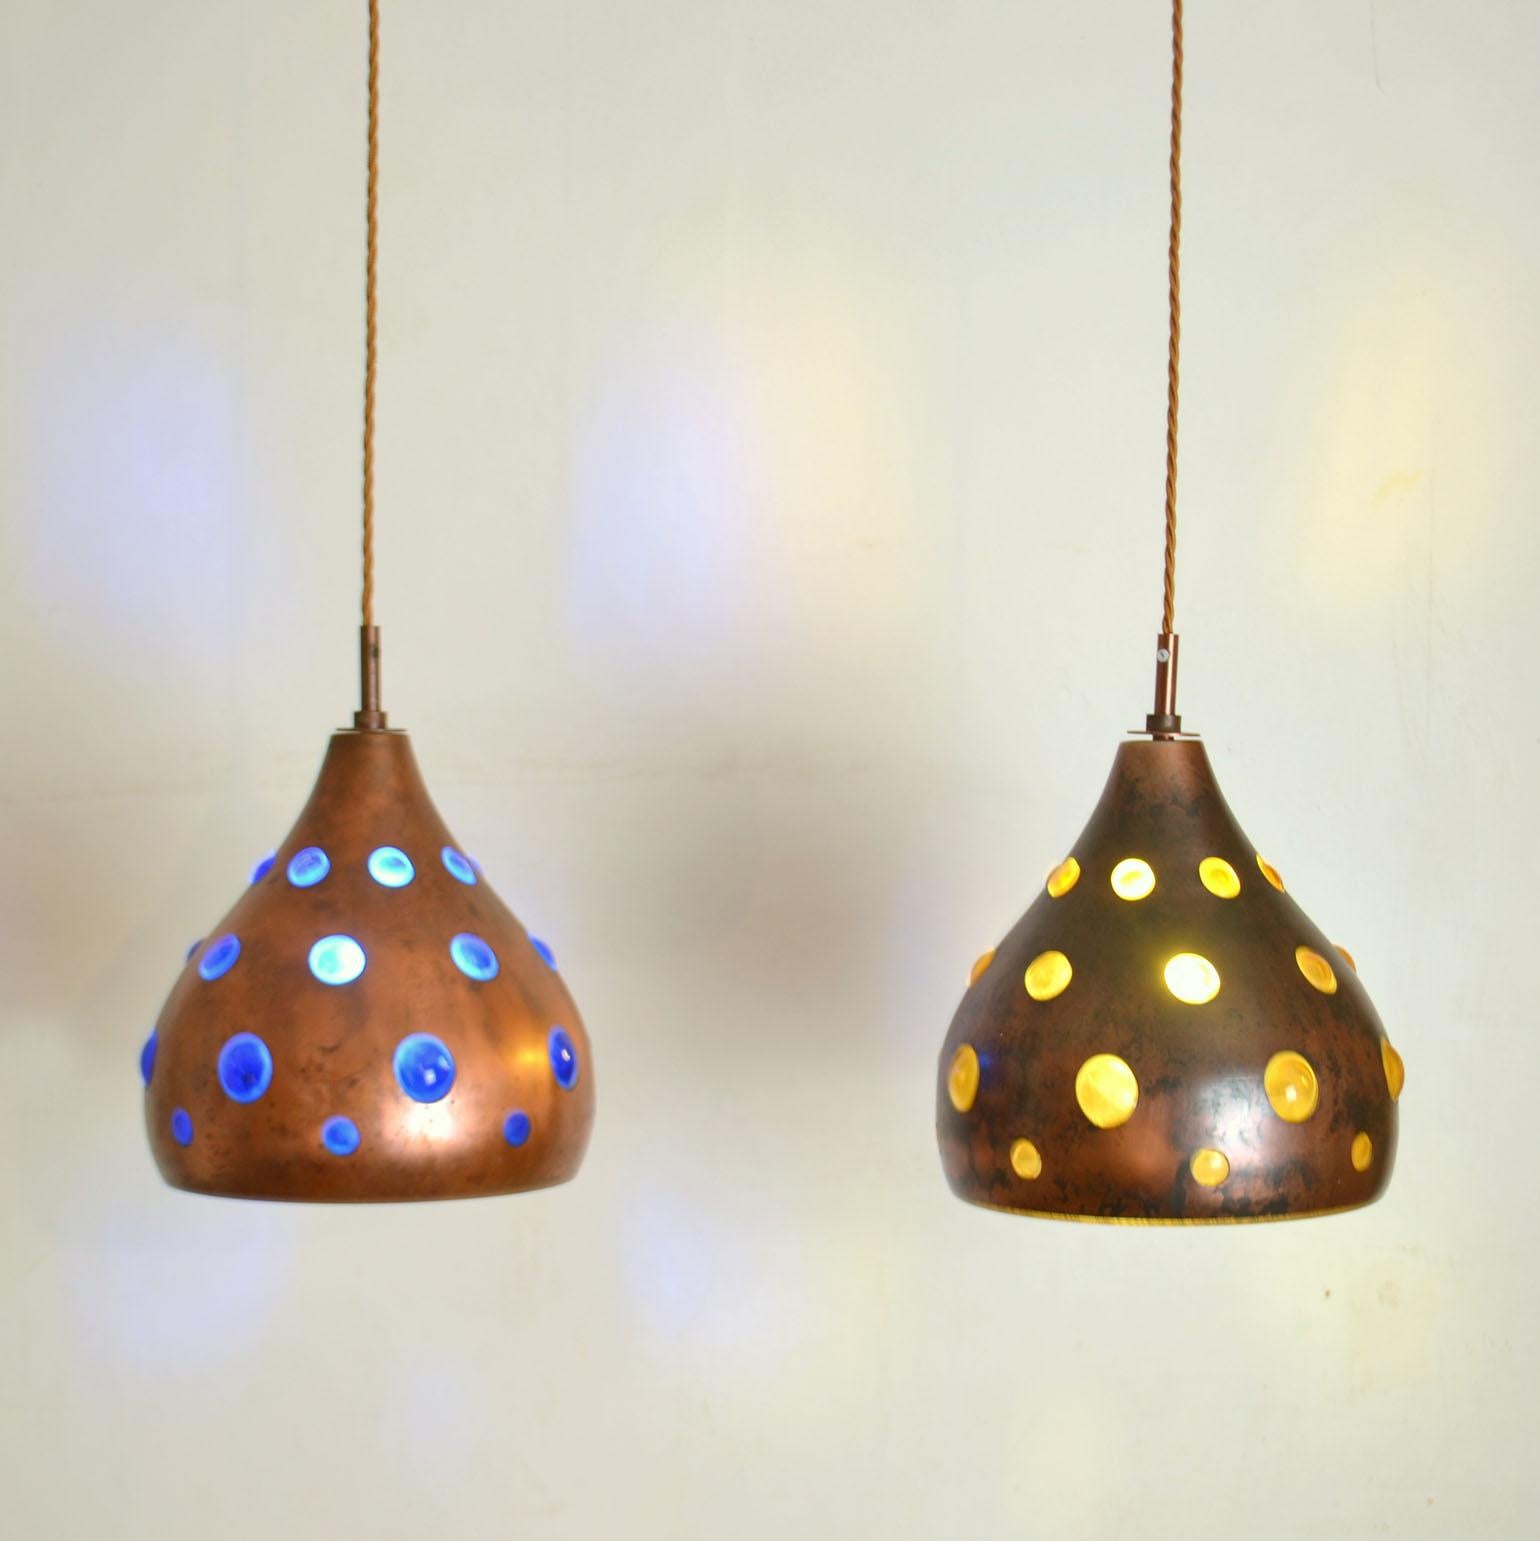 Pair of blue and amber pendant lamps are made from blown glass & oxidized copper. They are all unique in execution. The deep blue and amber expanded glass is blown with regularity into external patinated copper spherical or rectangular frames. The